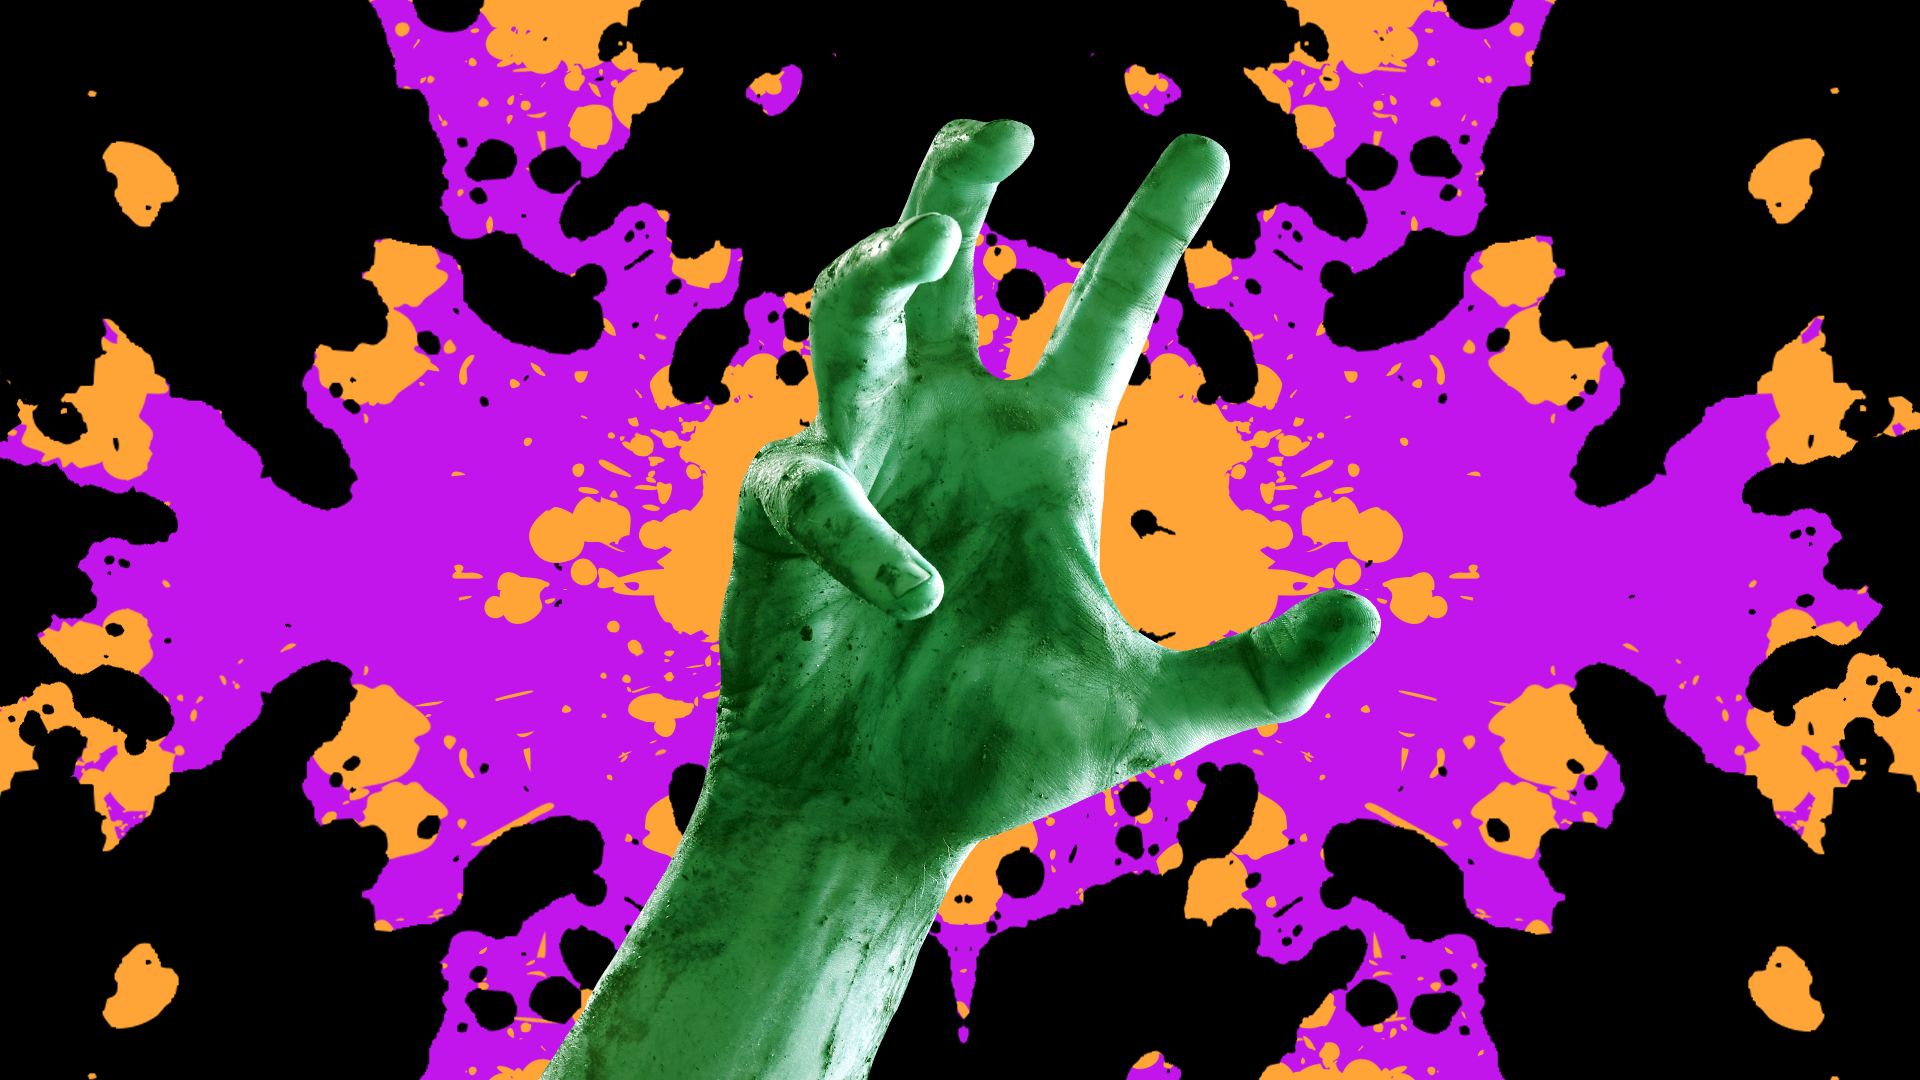 Spooky hand on Halloween background